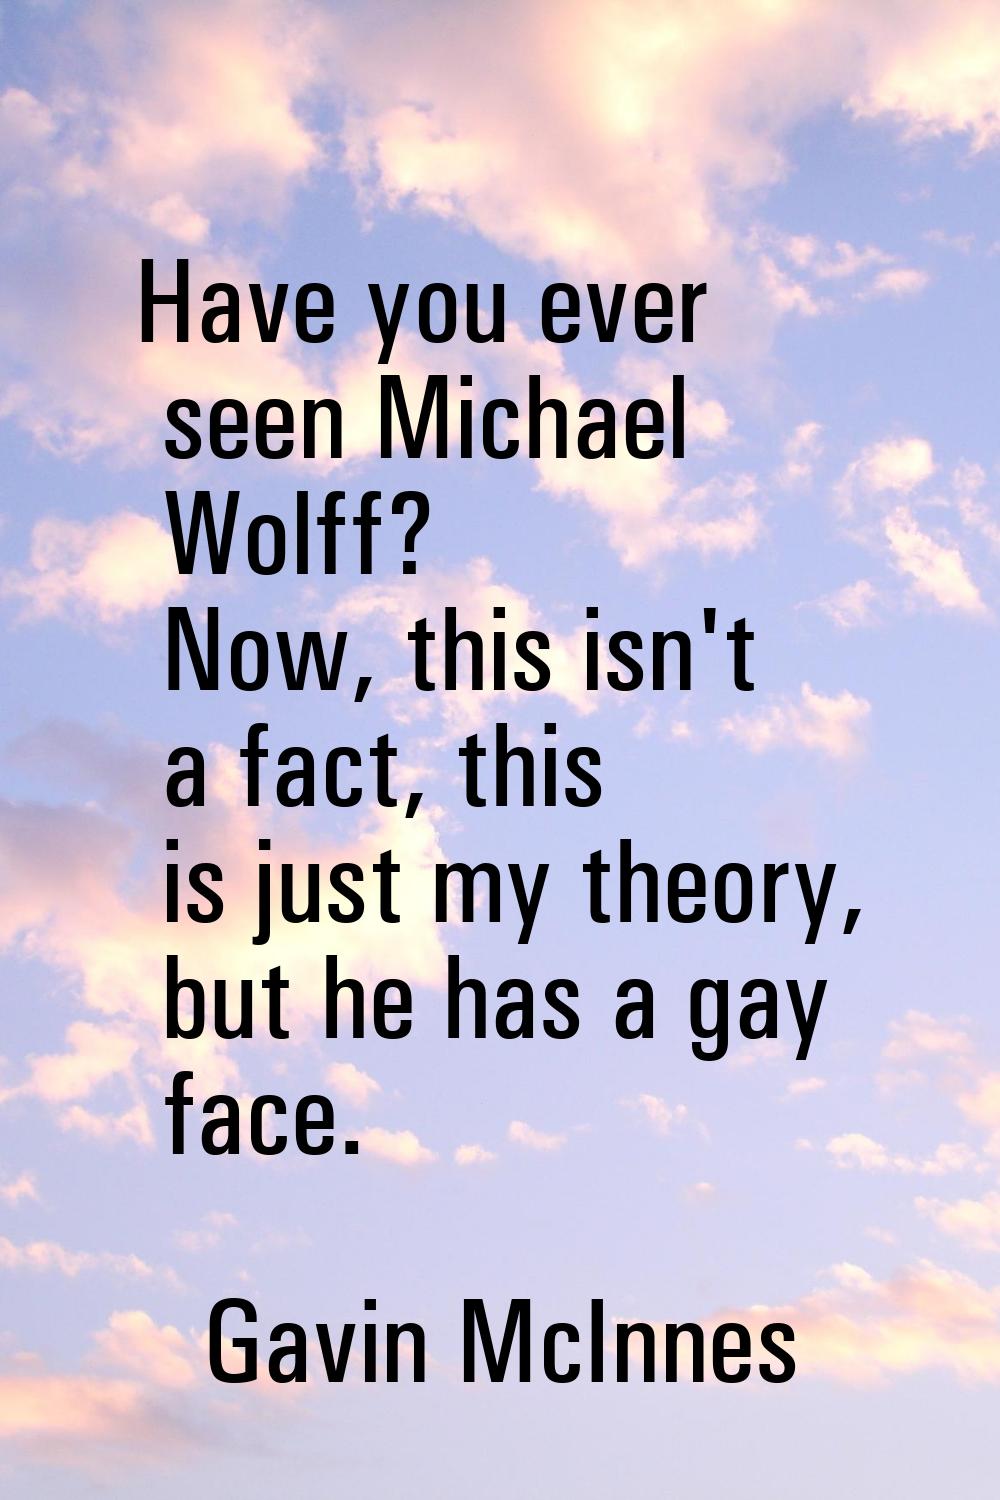 Have you ever seen Michael Wolff? Now, this isn't a fact, this is just my theory, but he has a gay 